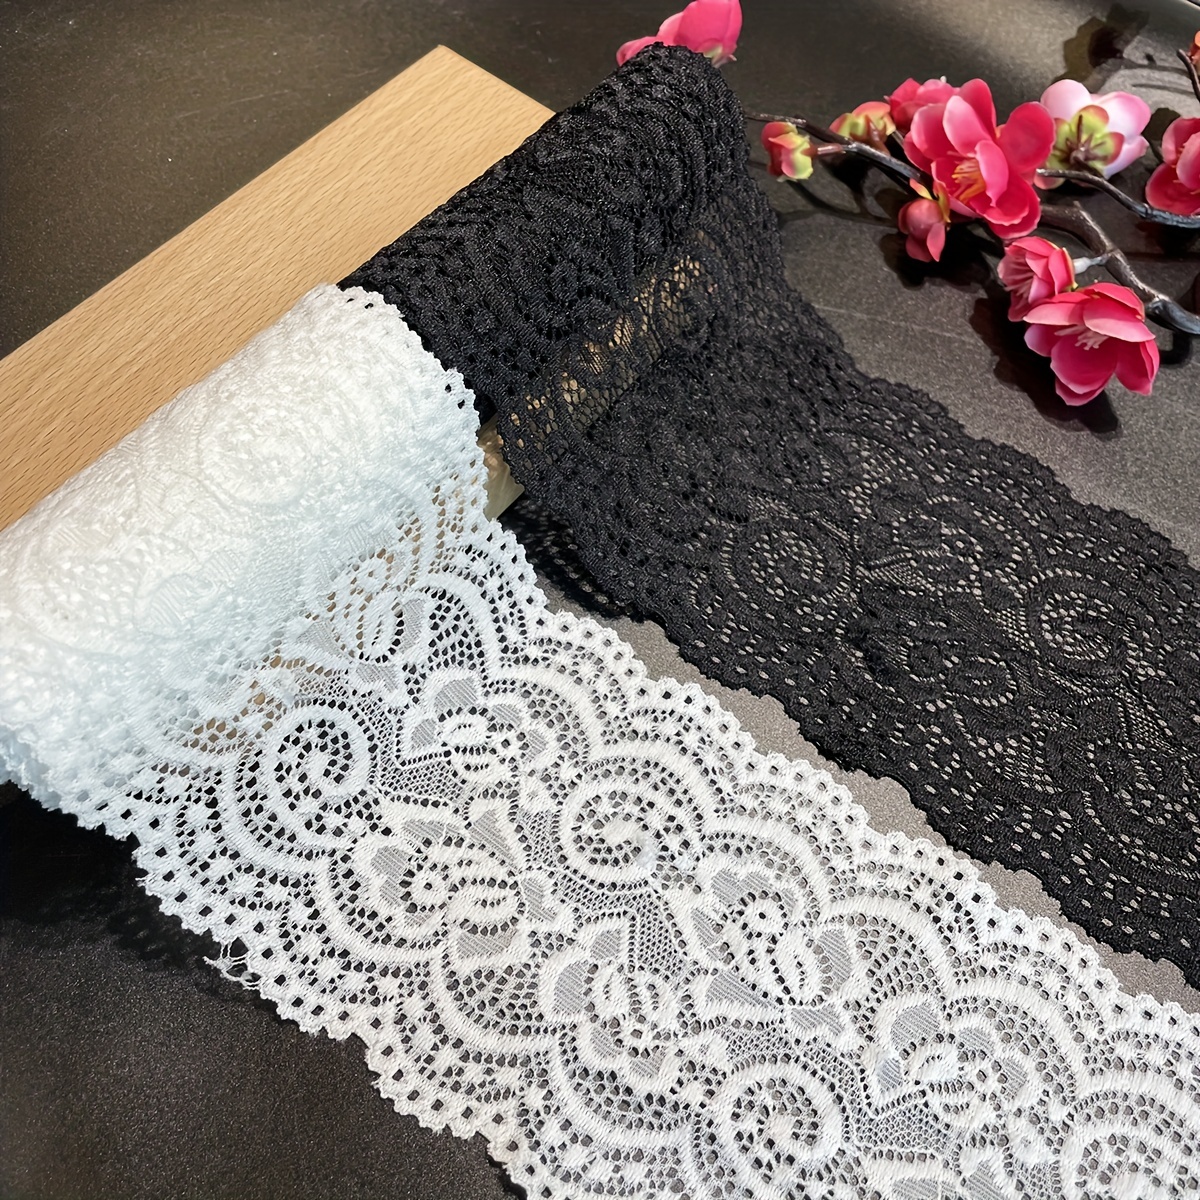 Elastic White Lace Ribbon African Lace Fabric Sewing Embroidered Lace Trim  Wedding Dress Clothing Accessories Ribbons